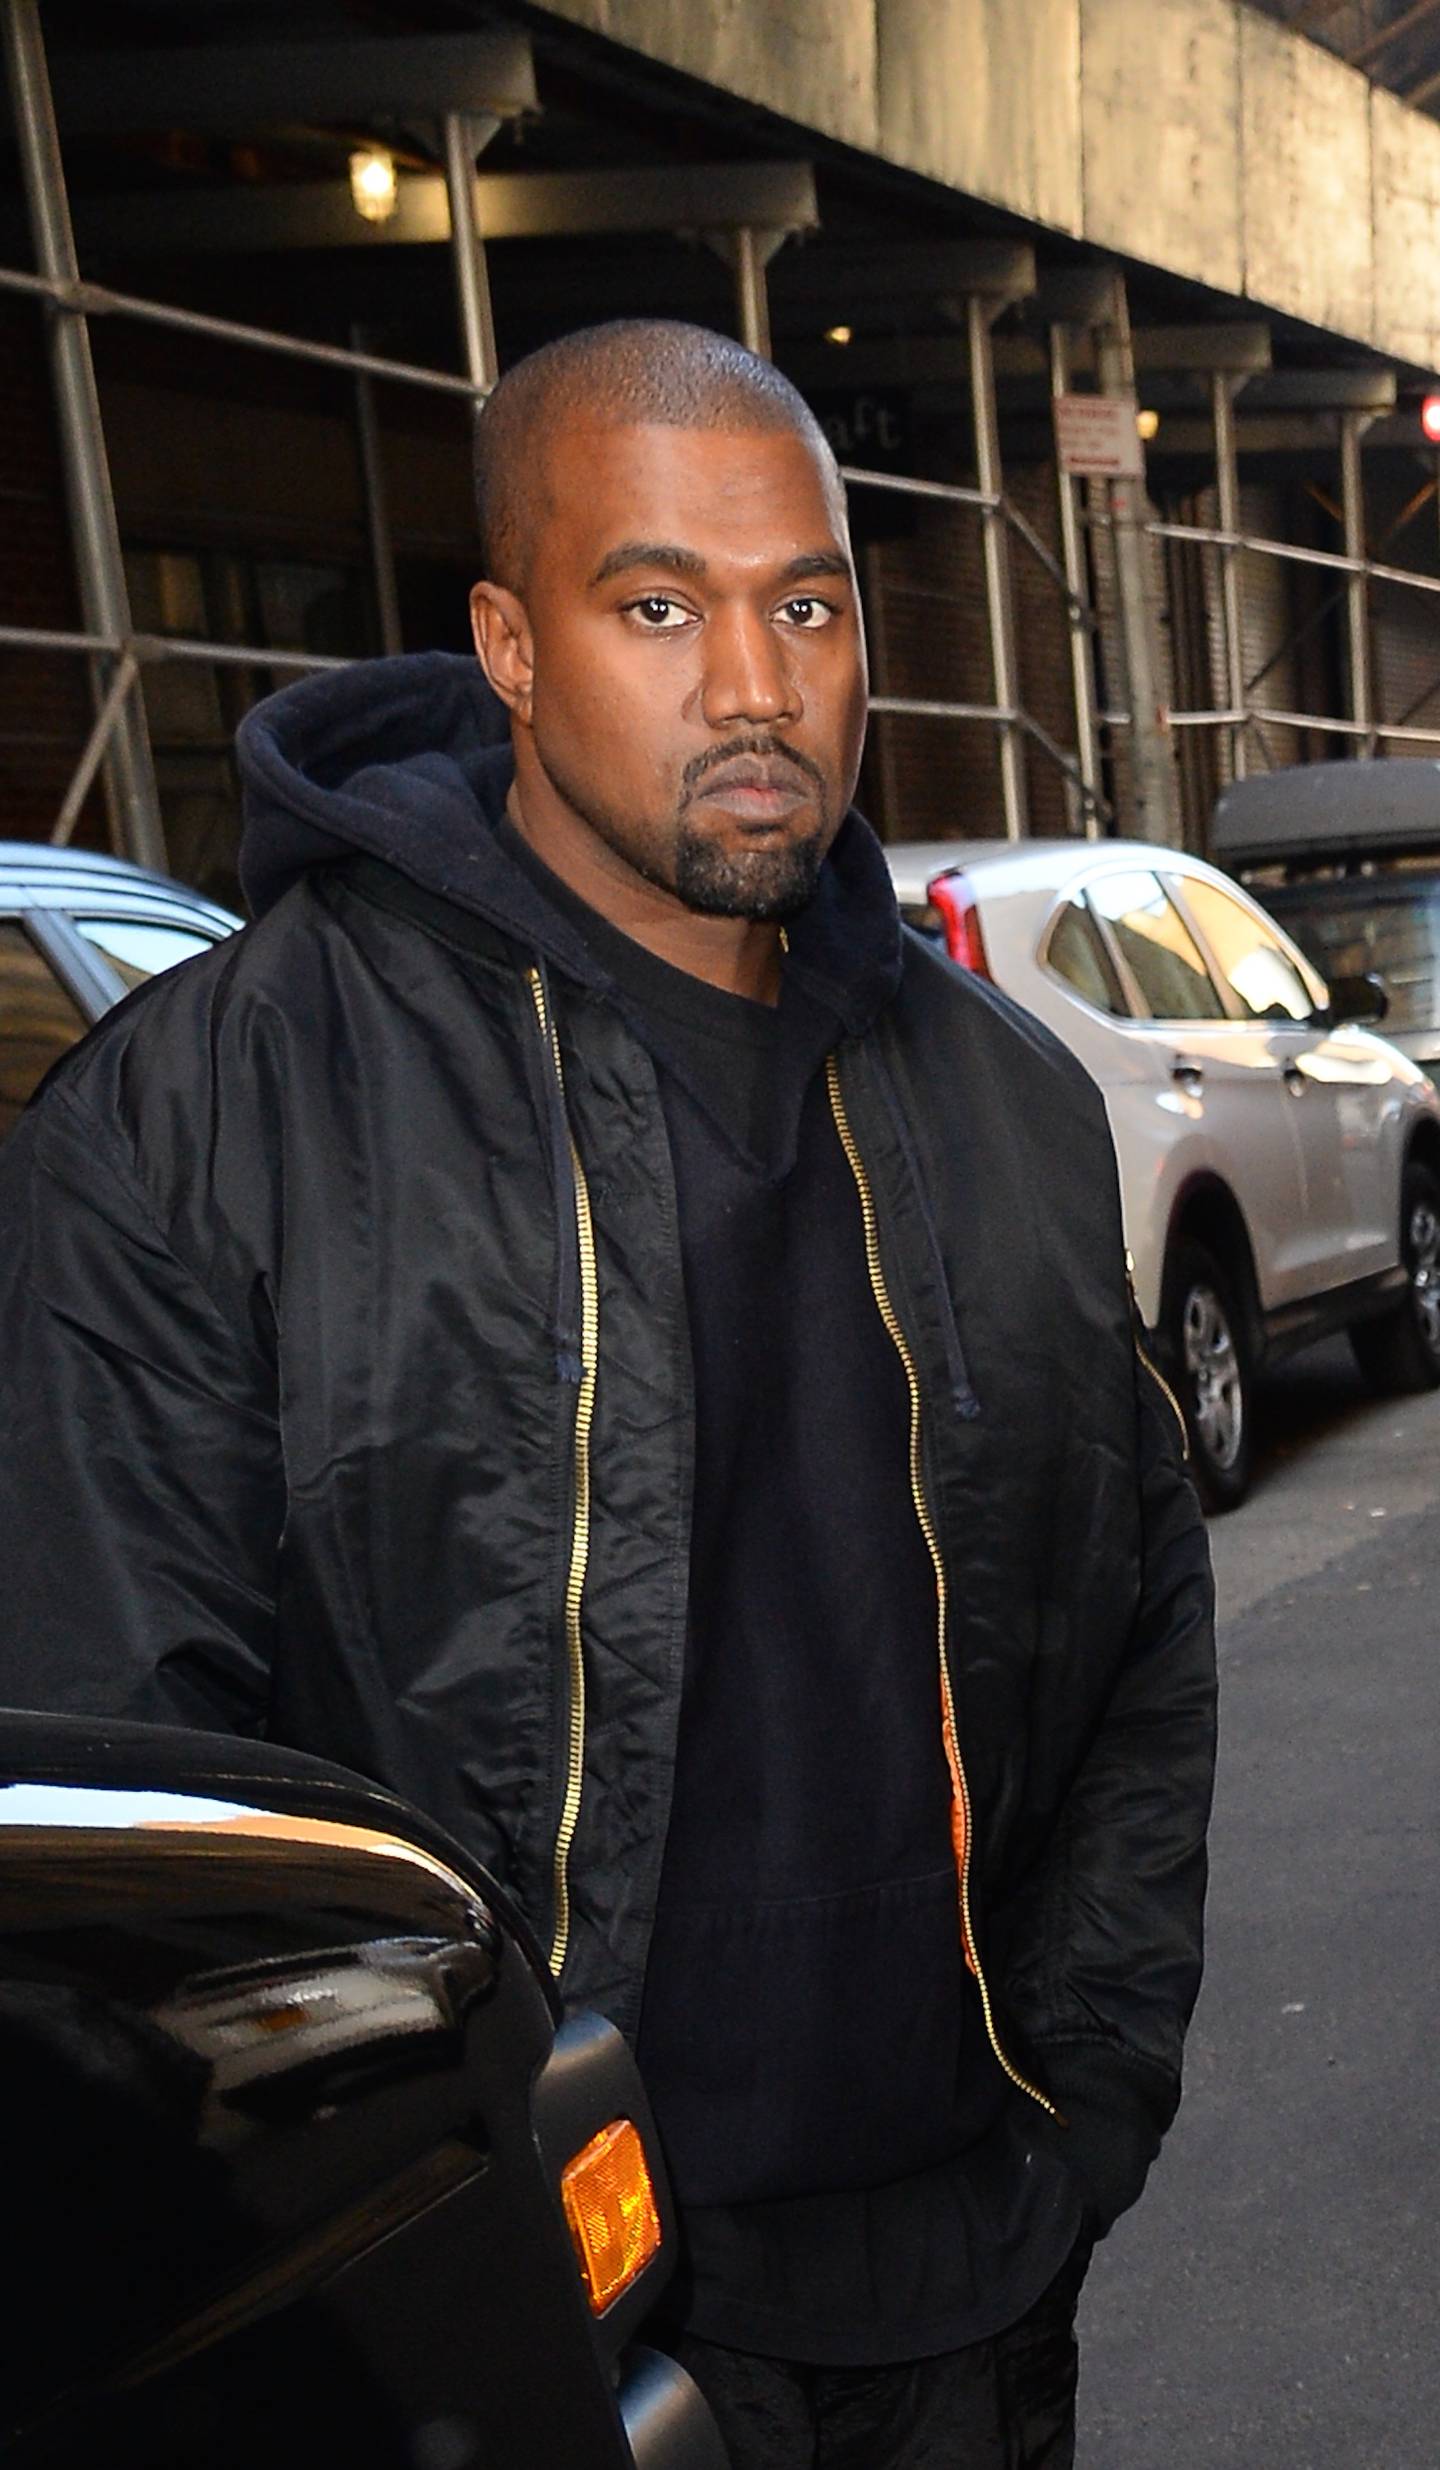 5 Men Other Than Kanye West Who've Admitted To Getting Plastic Surgery ...